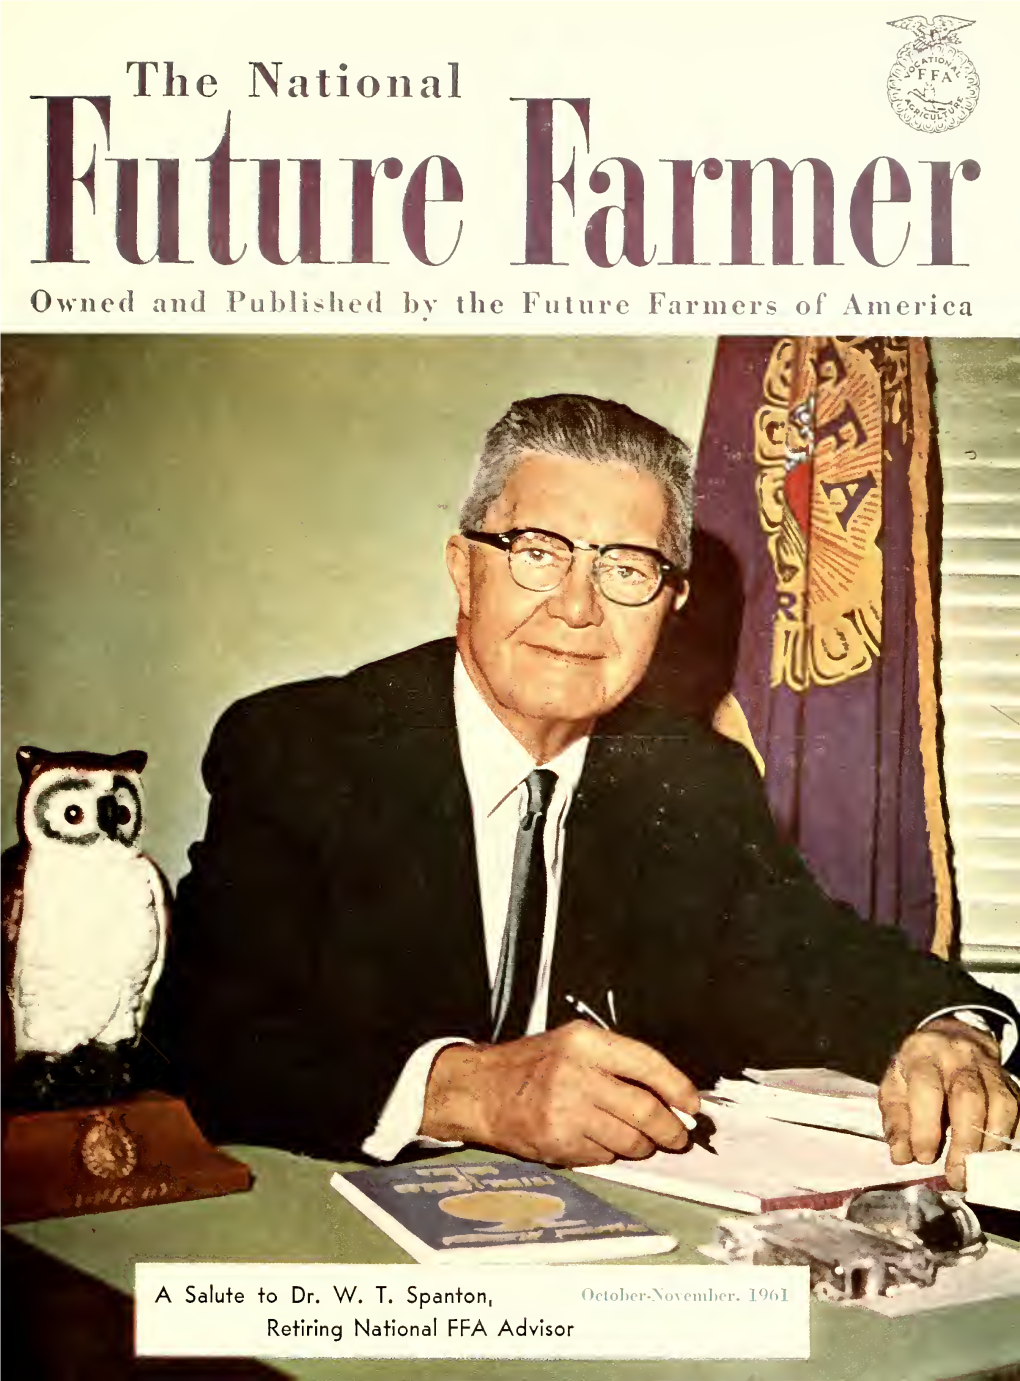 National Future Farmer Owned and Published by the Future Farmers of America